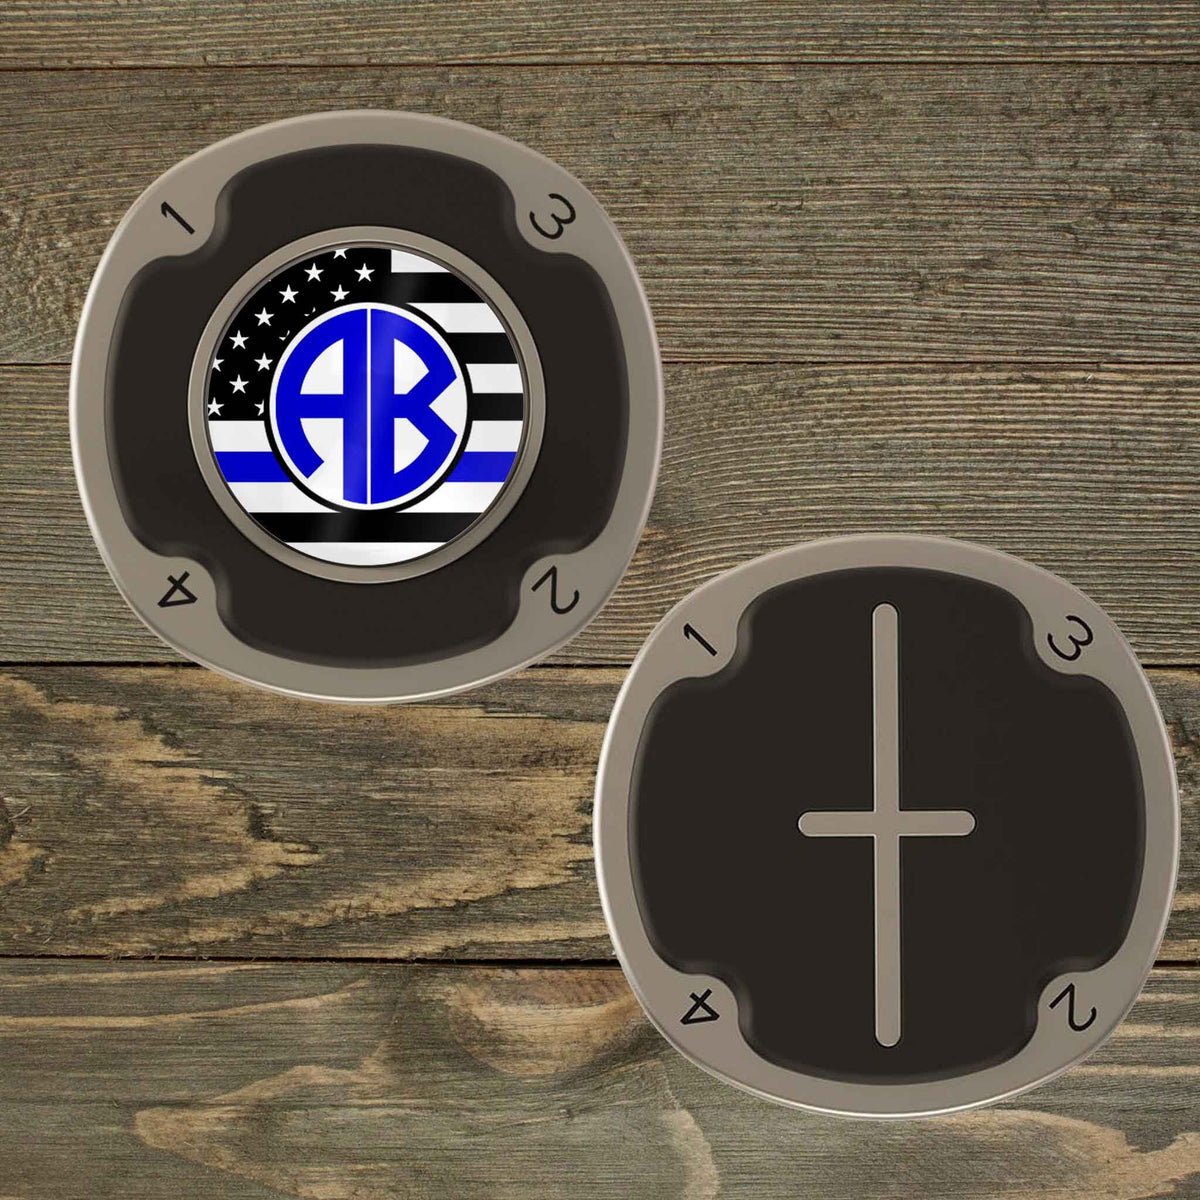 Personalized PitchFix MultiMarker Tool | Custom Ball Markers | Golf Gifts | Police Blue Line